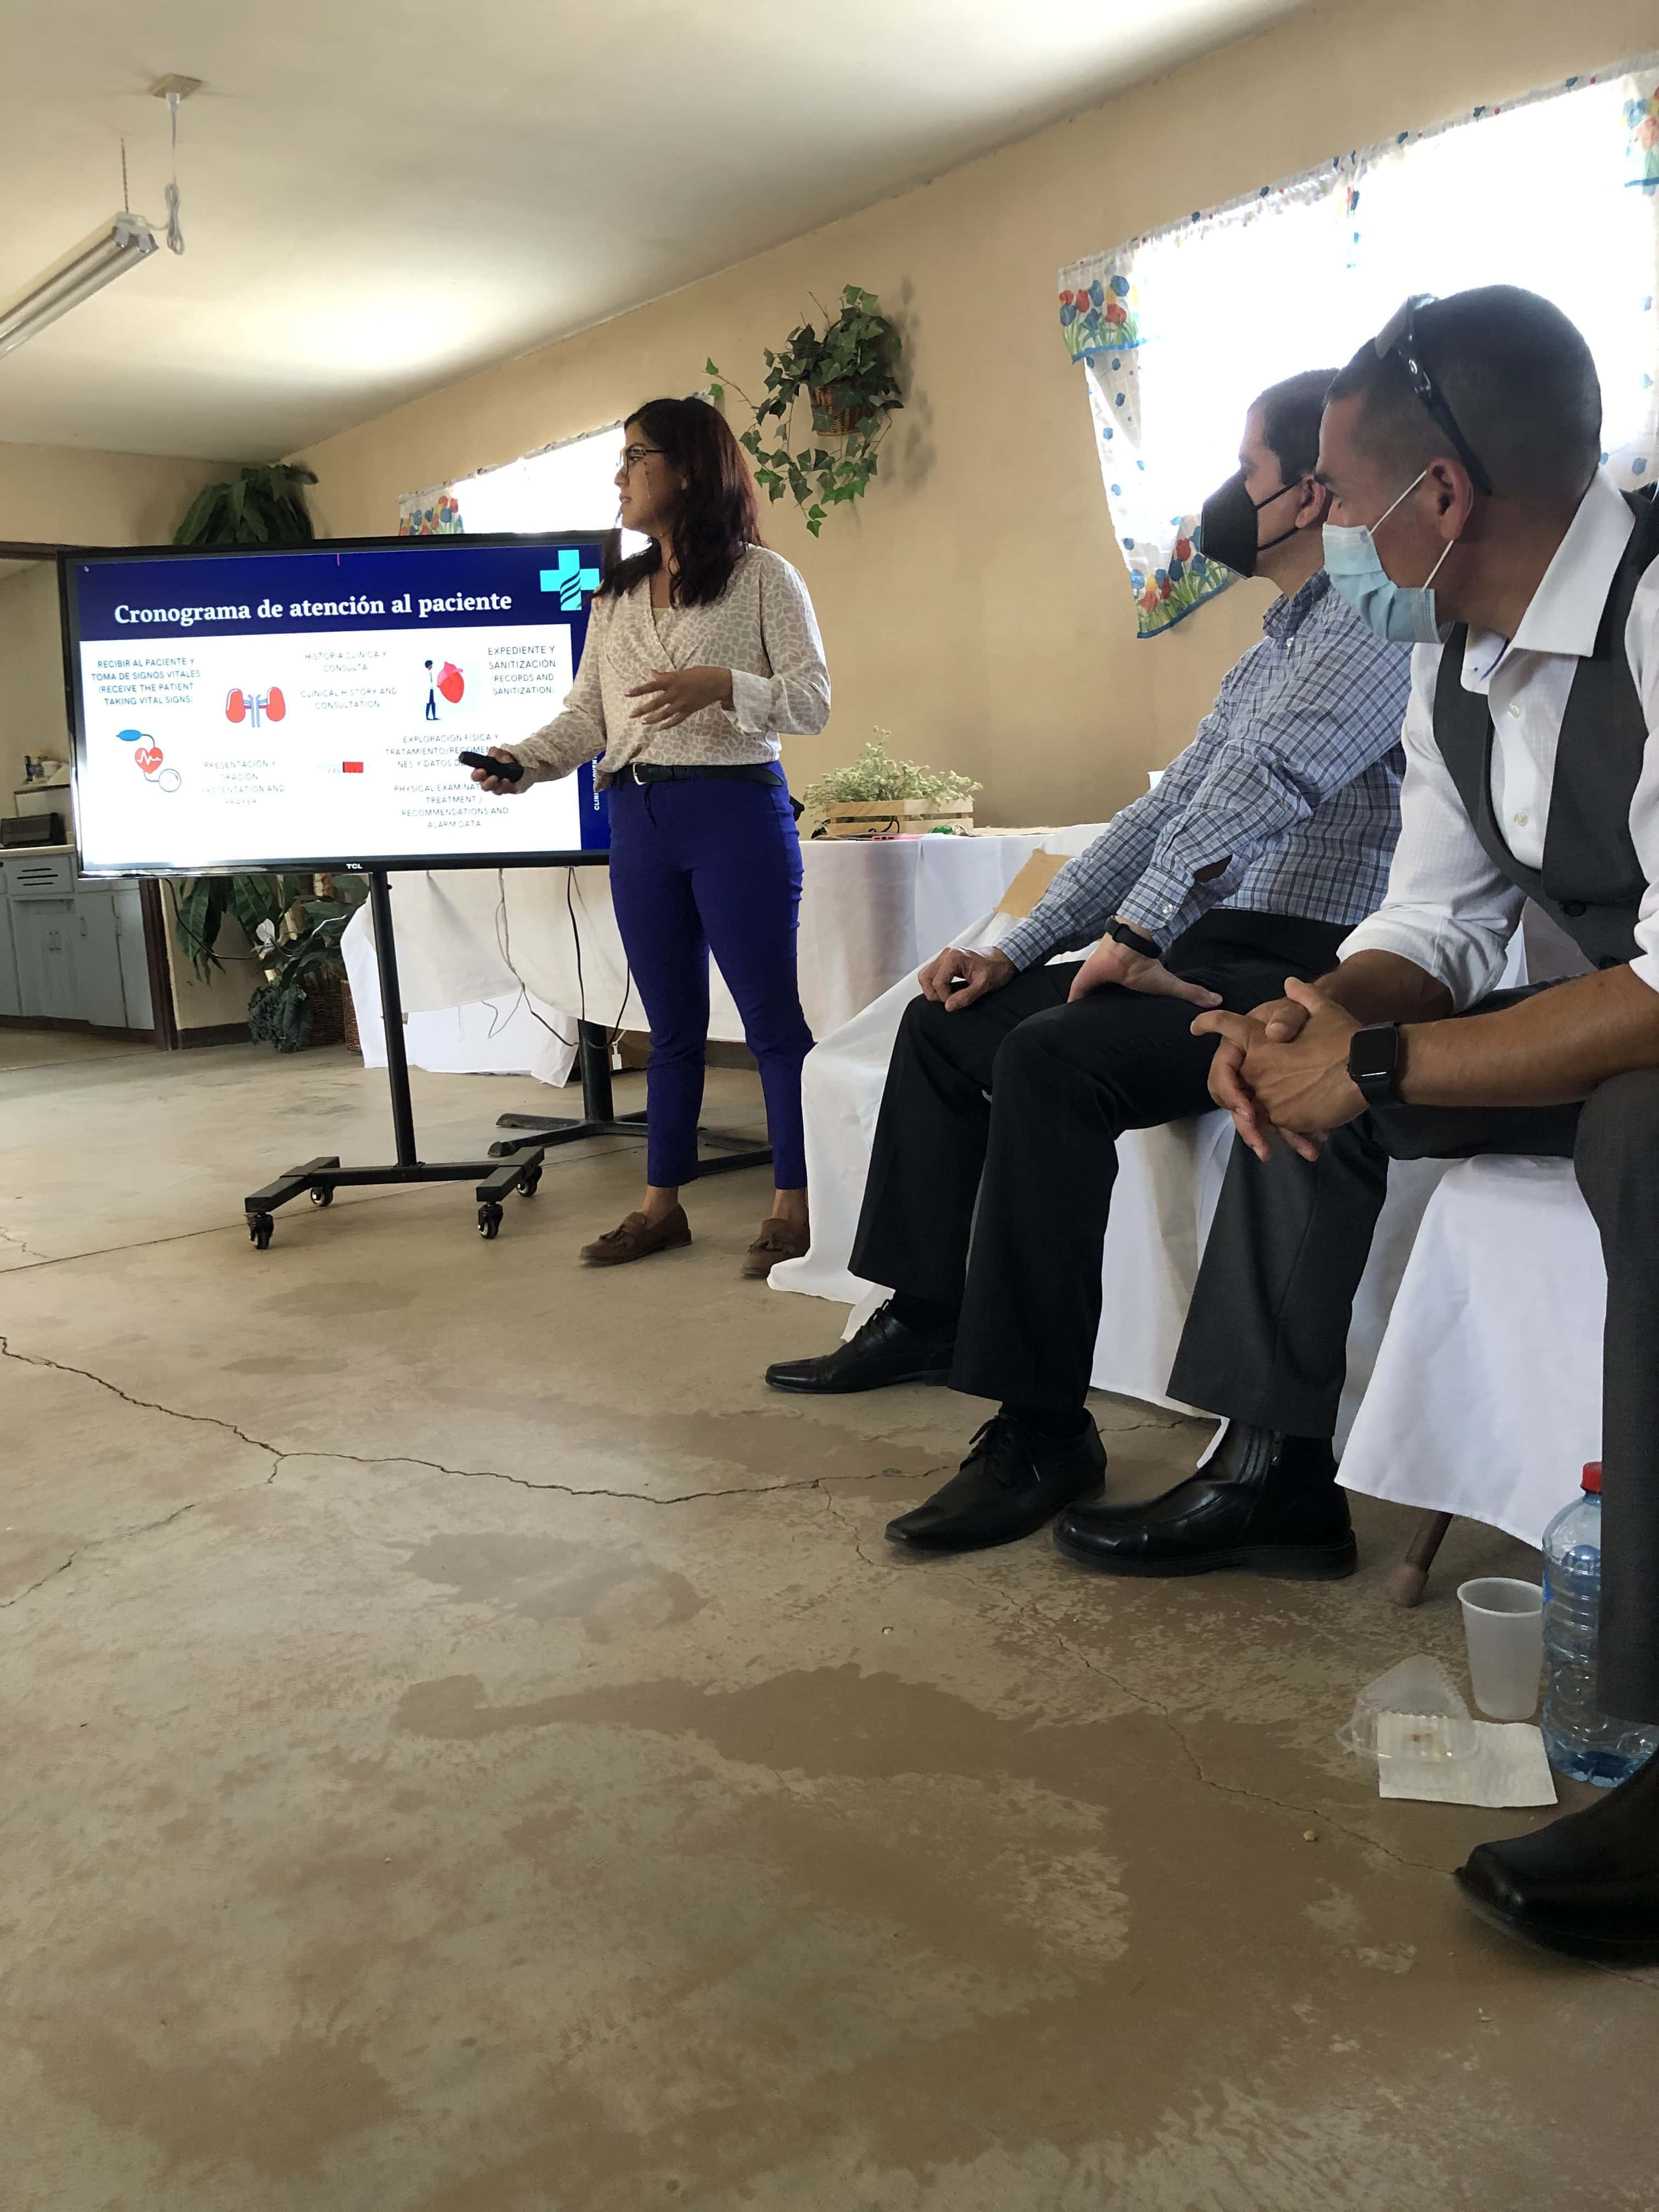 In Valle de la Trinidad, Baja California Sur, Mexico, clinic administrator Yetlanezy Olguín (standing) provides information about the local community and the need for the clinic. [Photo: Adventist Health]